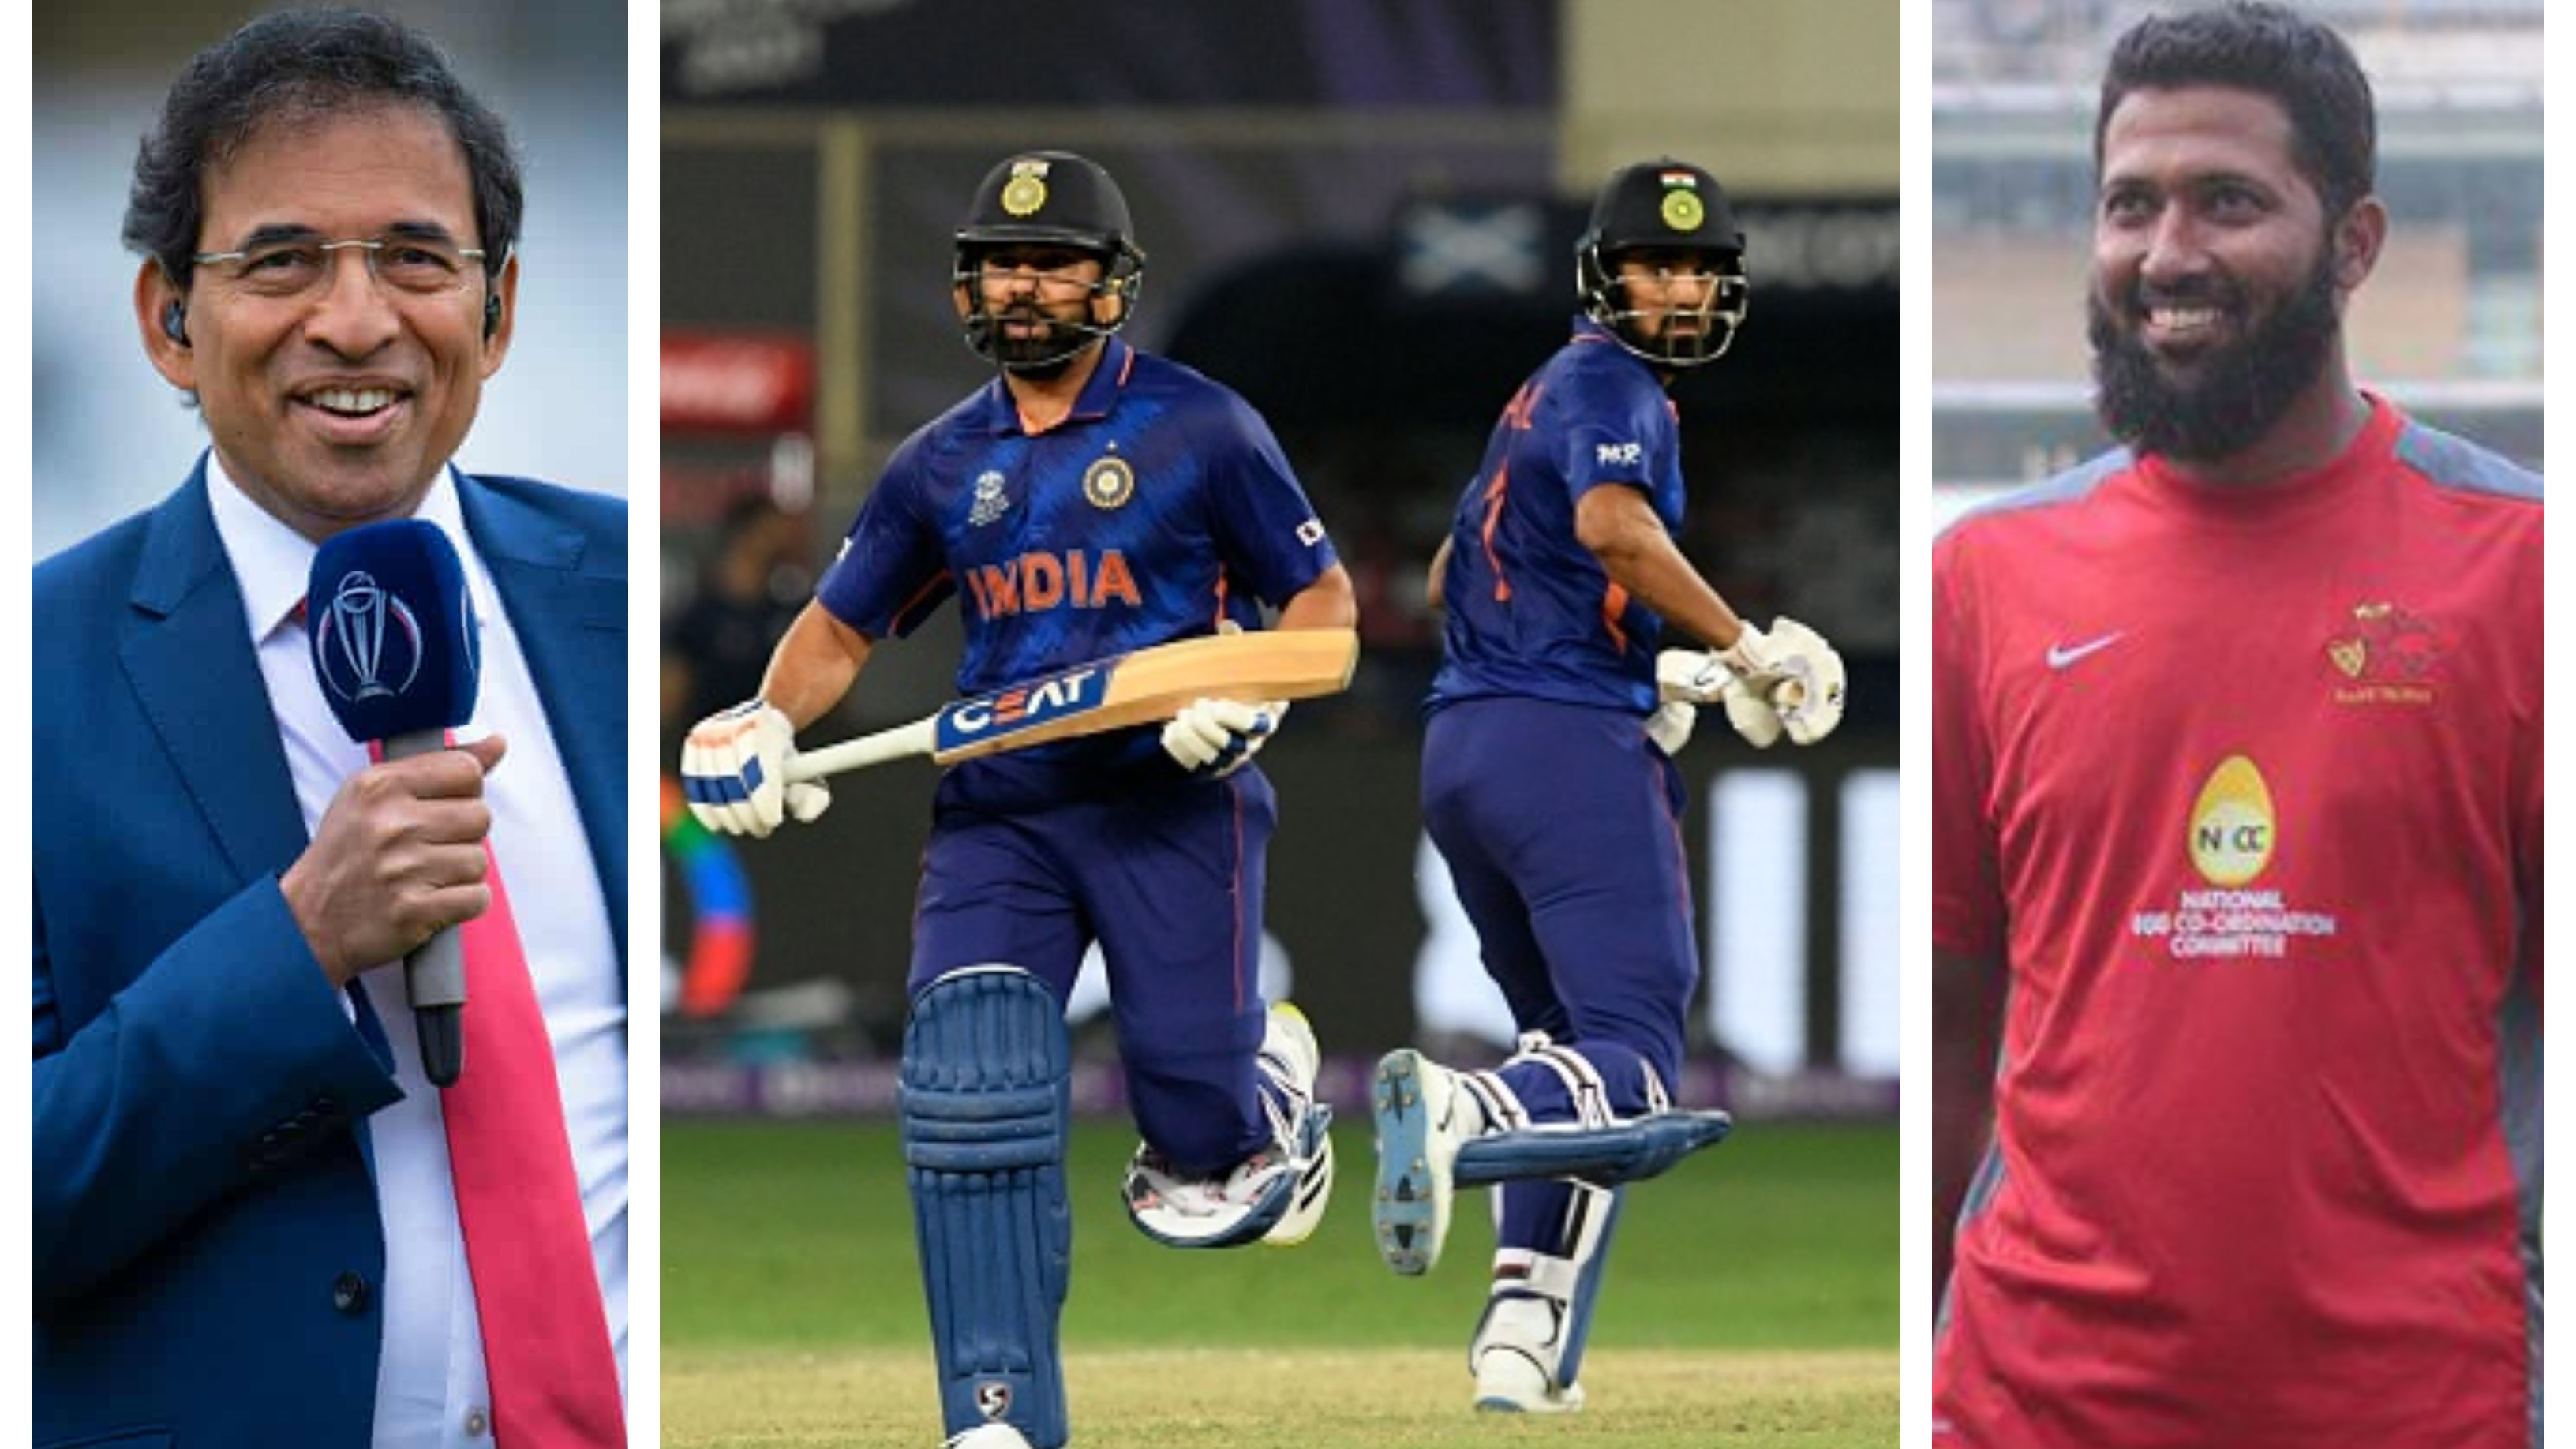 T20 World Cup 2021: Cricket fraternity reacts as Rahul-Rohit blitz chases down Scotland’s 85 in just 6.3 overs